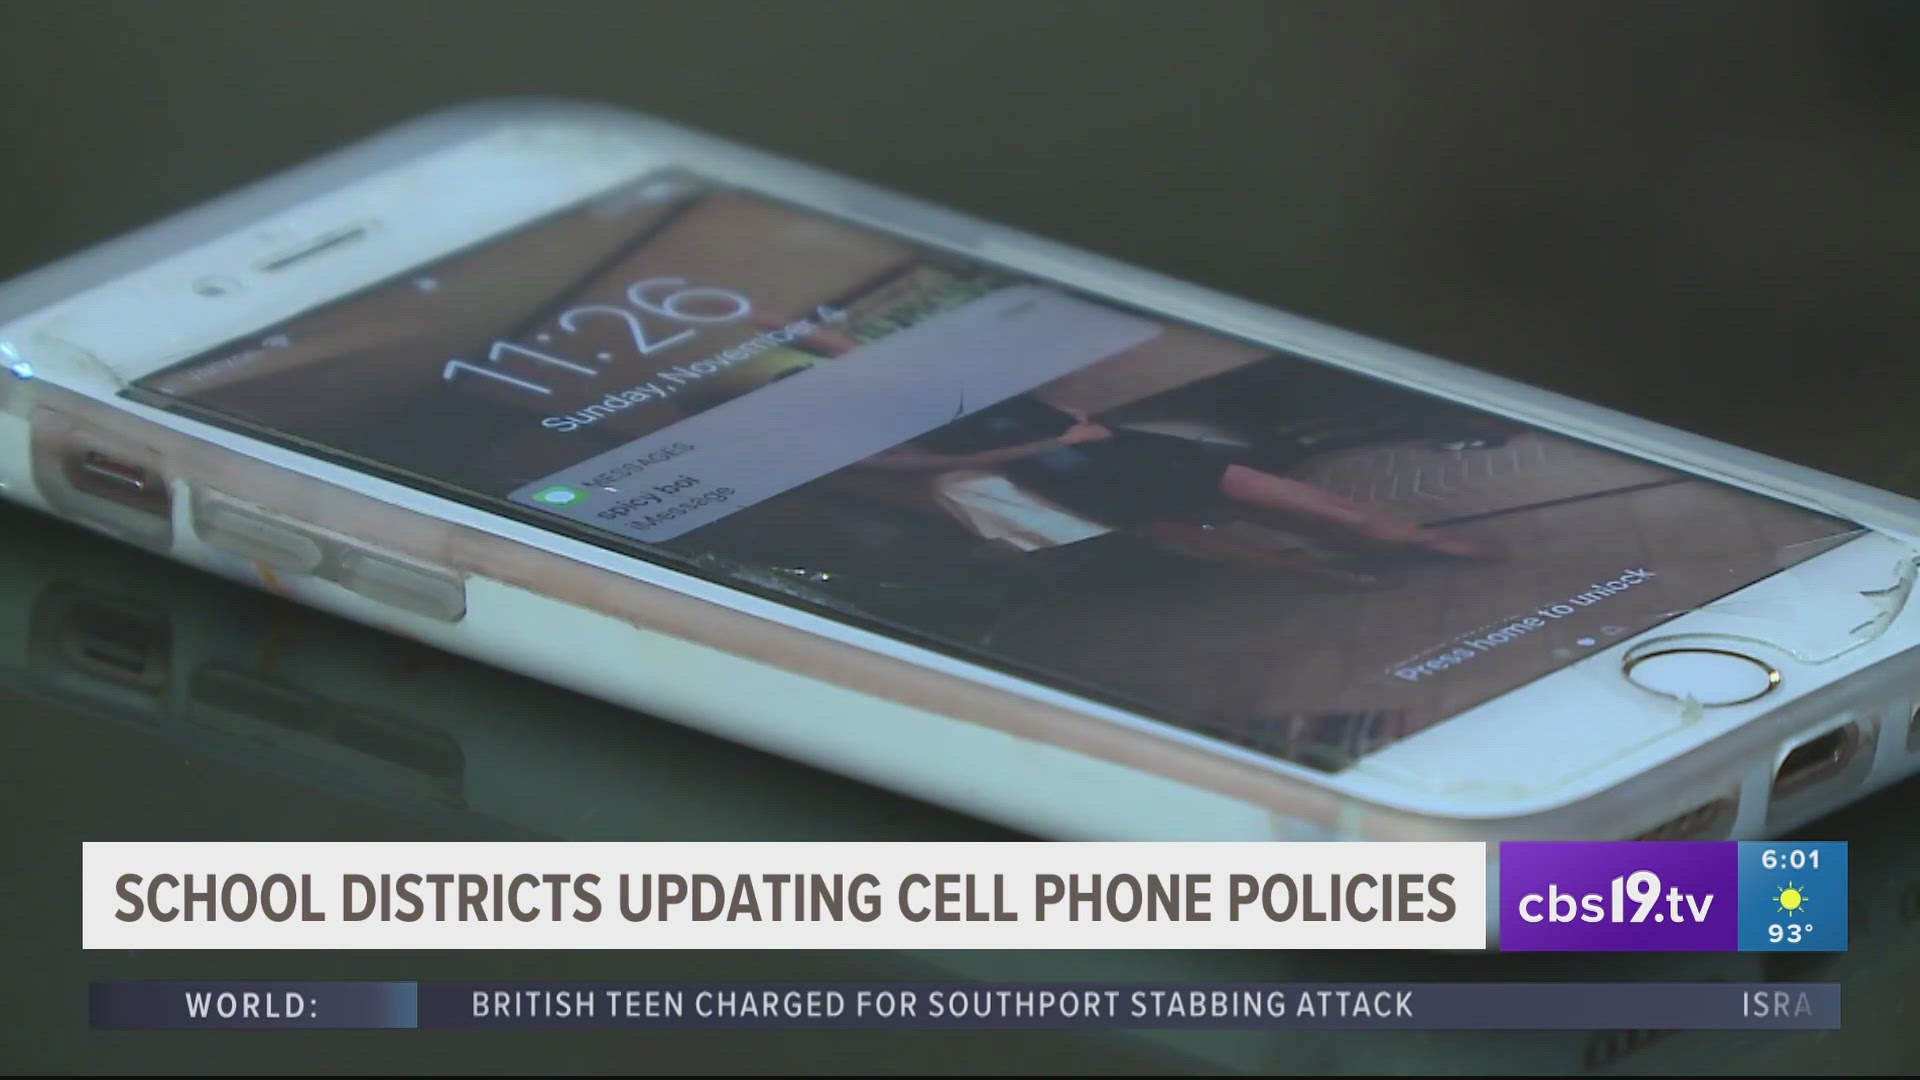 Schools throughout East Texas are doing their best to keep students engaged in lessons by updating policies on cell phone usage in the classroom.